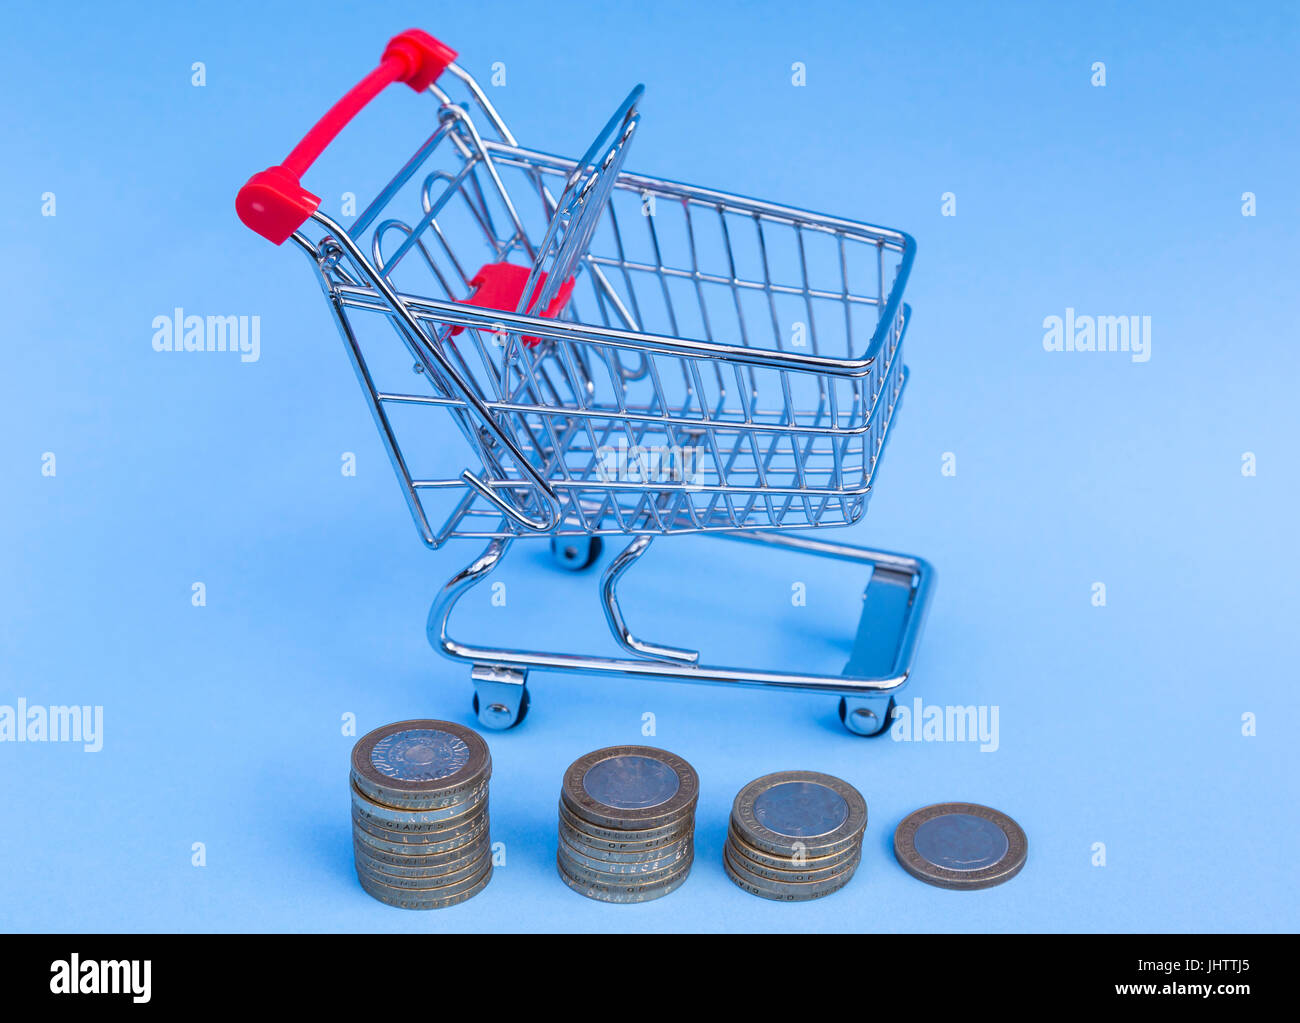 Shopping trolley full of one pound coins Stock Photo